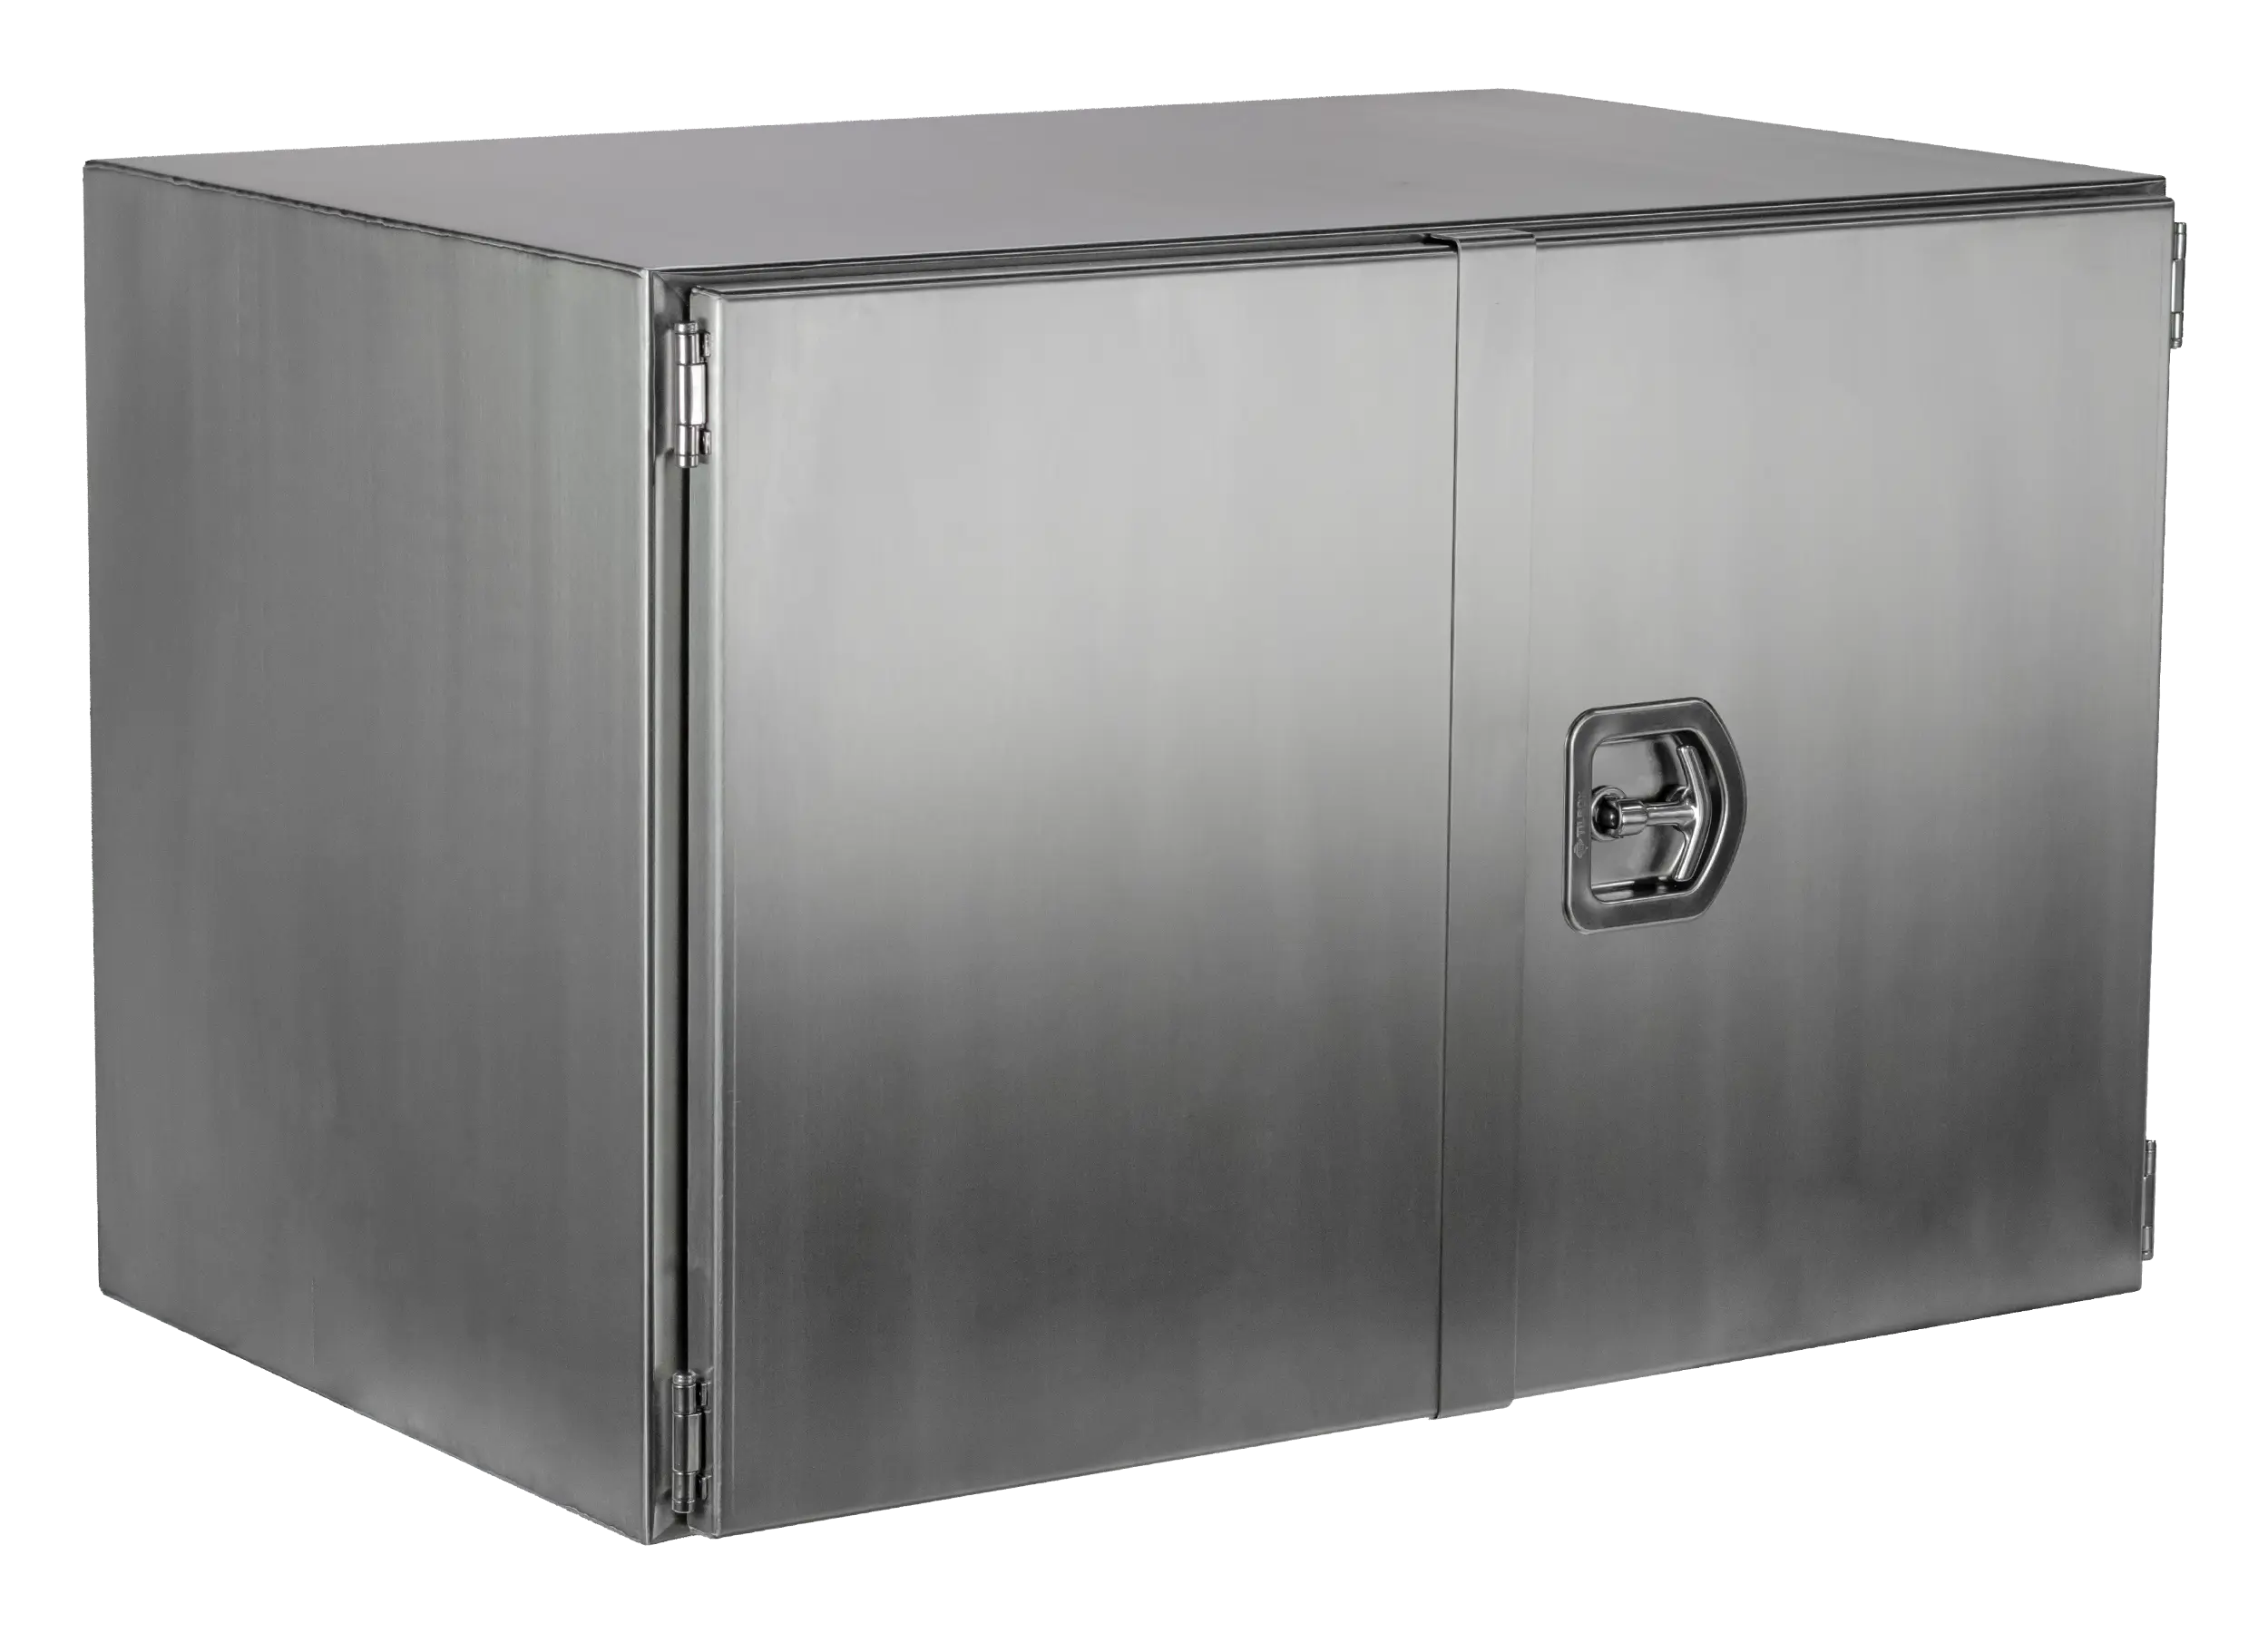 Toolbox - Stainless Steel – Overlapping Doors - 1200x600x600 mm